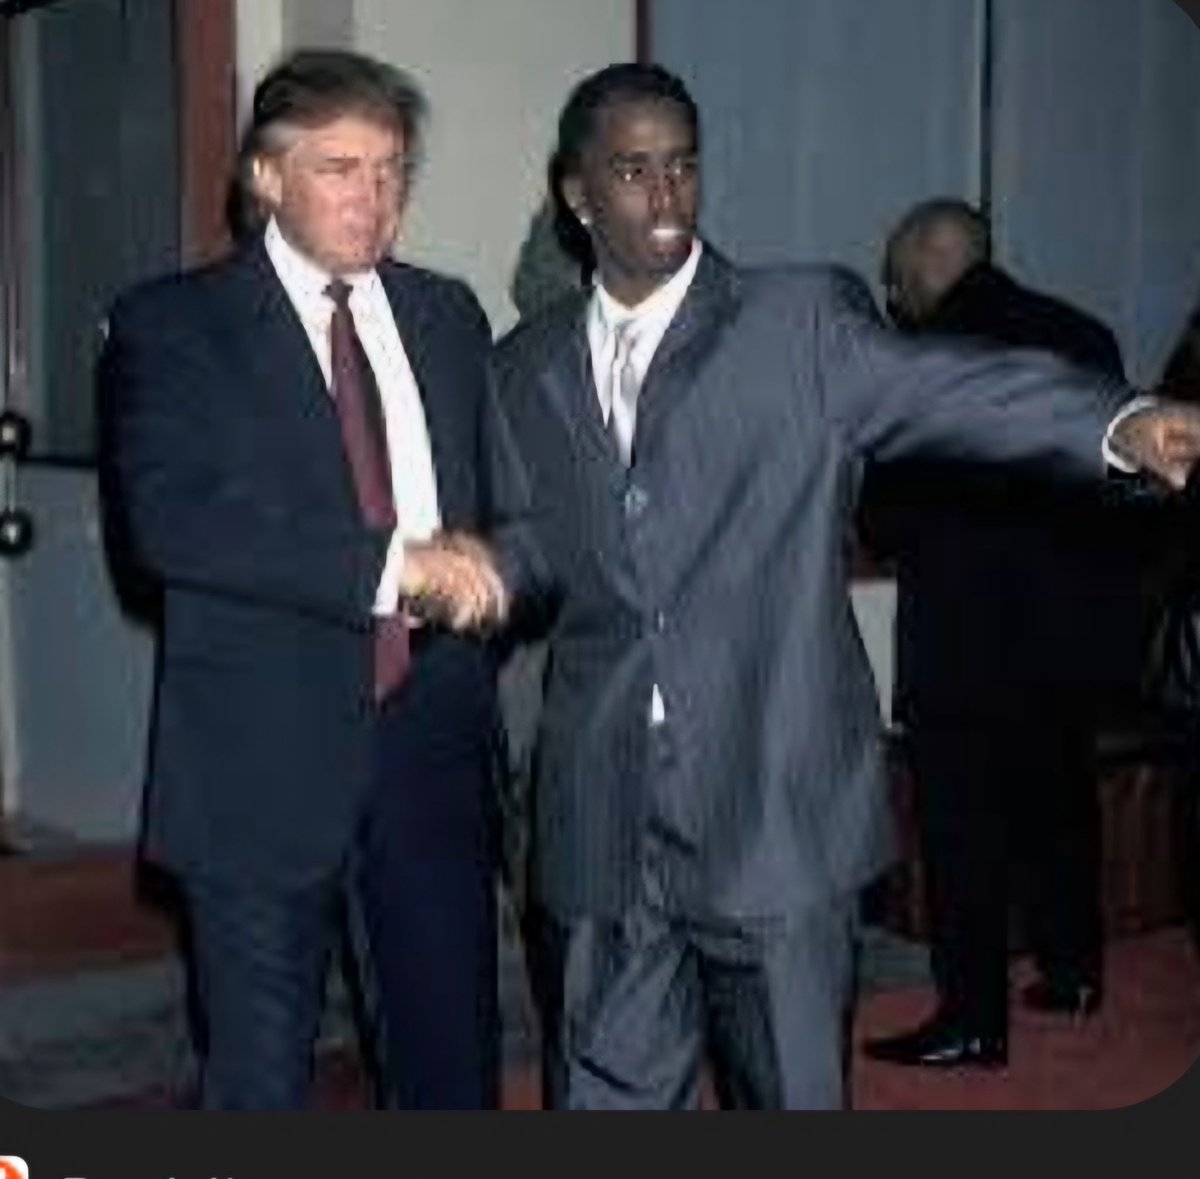 Alright. Let's talk about it. I'm not going to post the video of Sean Combs beating his girlfriend. It's very hard to watch. He is a monster. An ex-FBI agent said he is the modern-day Epstein. I confess, I don't know much about Combs. Bring your tea and set it here. Help me go